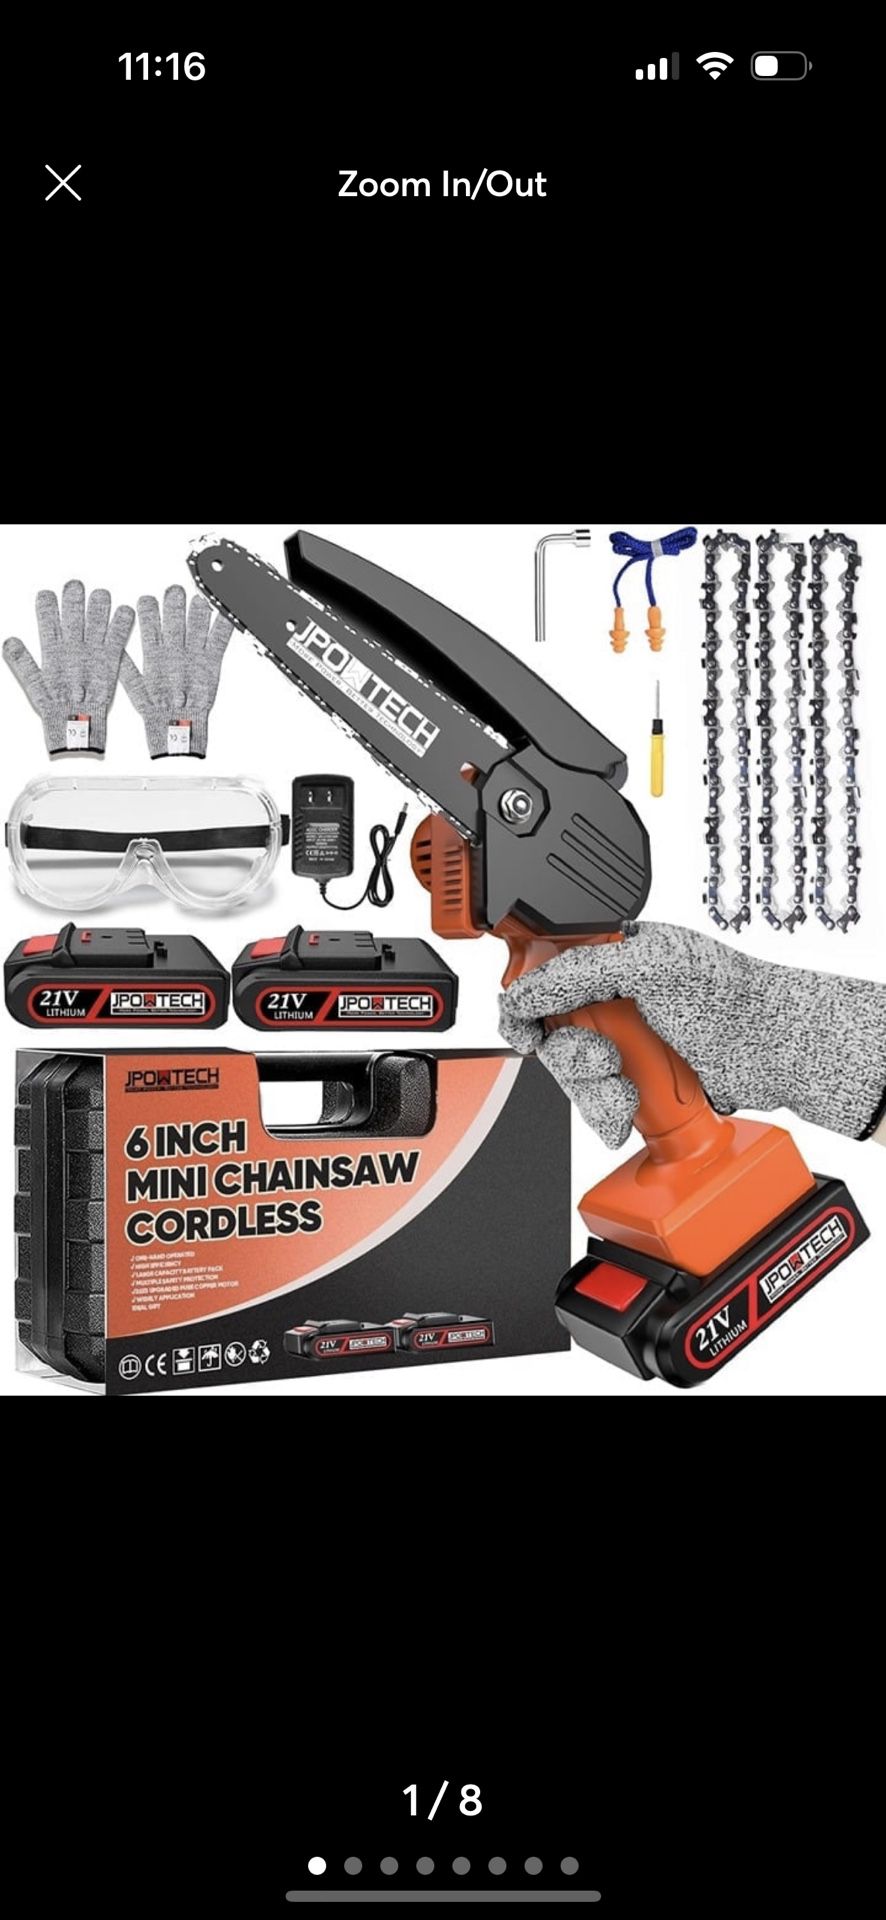 Mini Chainsaw Cordless 6-Inch with 2 Battery, One-Handed Smooth Cutting Portable